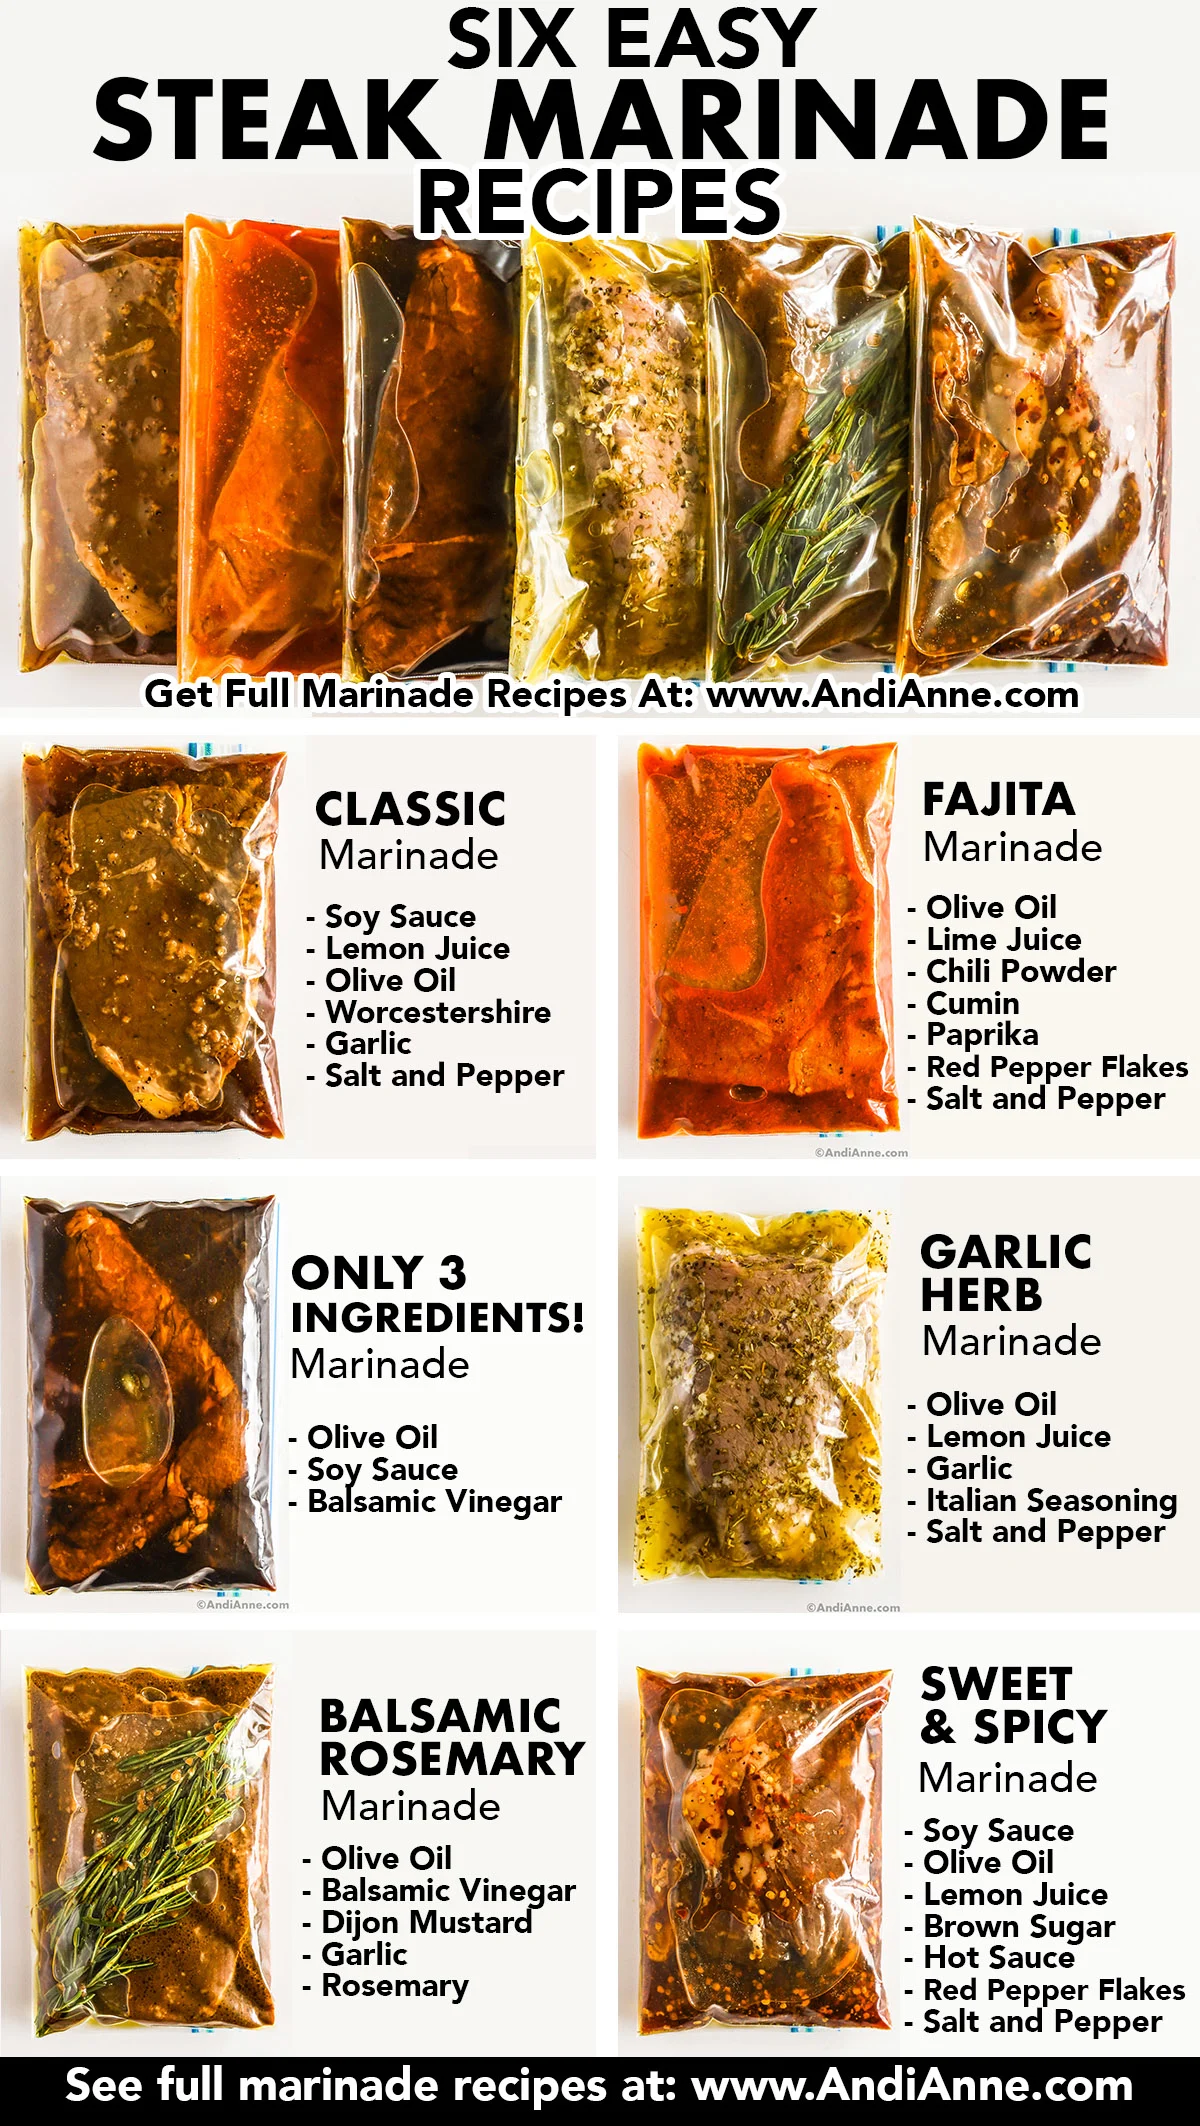 Six steak marinade recipes in bags with raw steaks. All labelled with ingredients list beside each one. Flavors include classic, fajita, 3 ingredients, garlic herb, balsamic rosemary, sweet and spicy